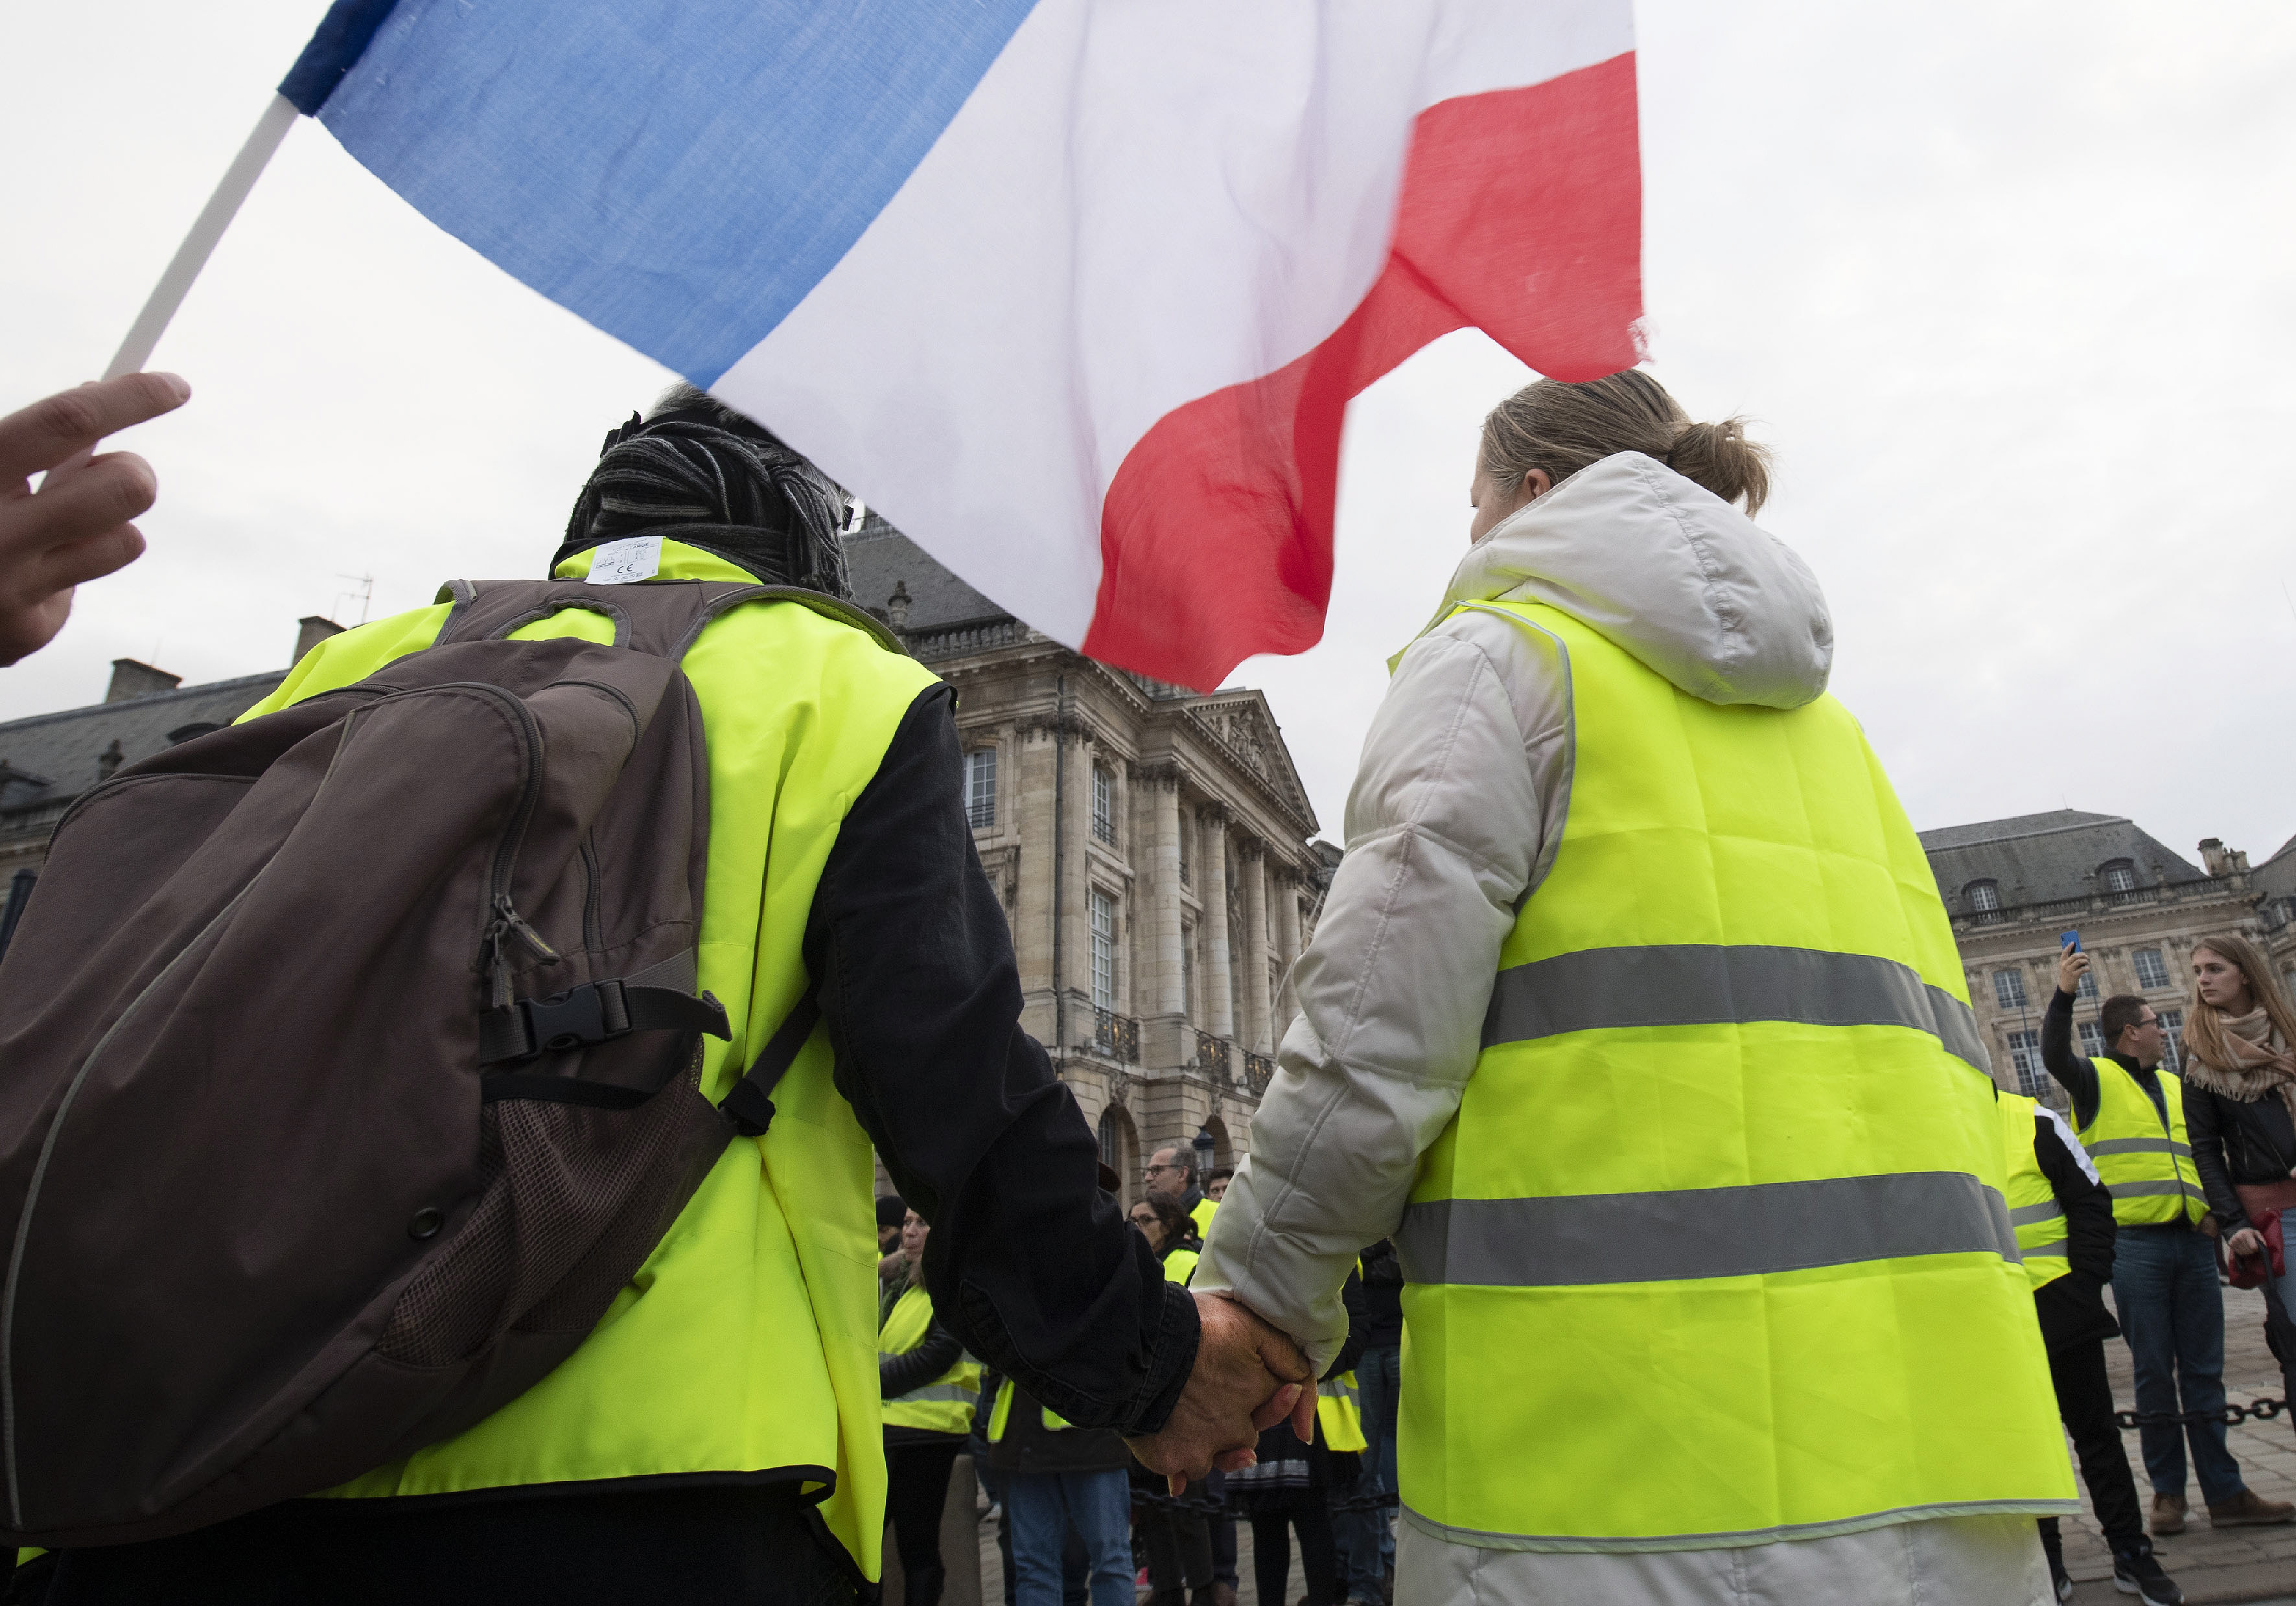 epa07217918 Protesters wearing yellow vests (gilets jaunes) demonstrate in Bordeaux, France, 08 December 2018. The so-called 'gilets jaunes' (yellow vests) are a protest movement, which reportedly has no political affiliation, is protesting across the nation over high fuel prices. Recent demonstrations of the movement, which reportedly has no political affiliation, had turned violent and caused authorities to close some landmark sites in Bordeaux this weekend.  EPA/CAROLINE BLUMBERG